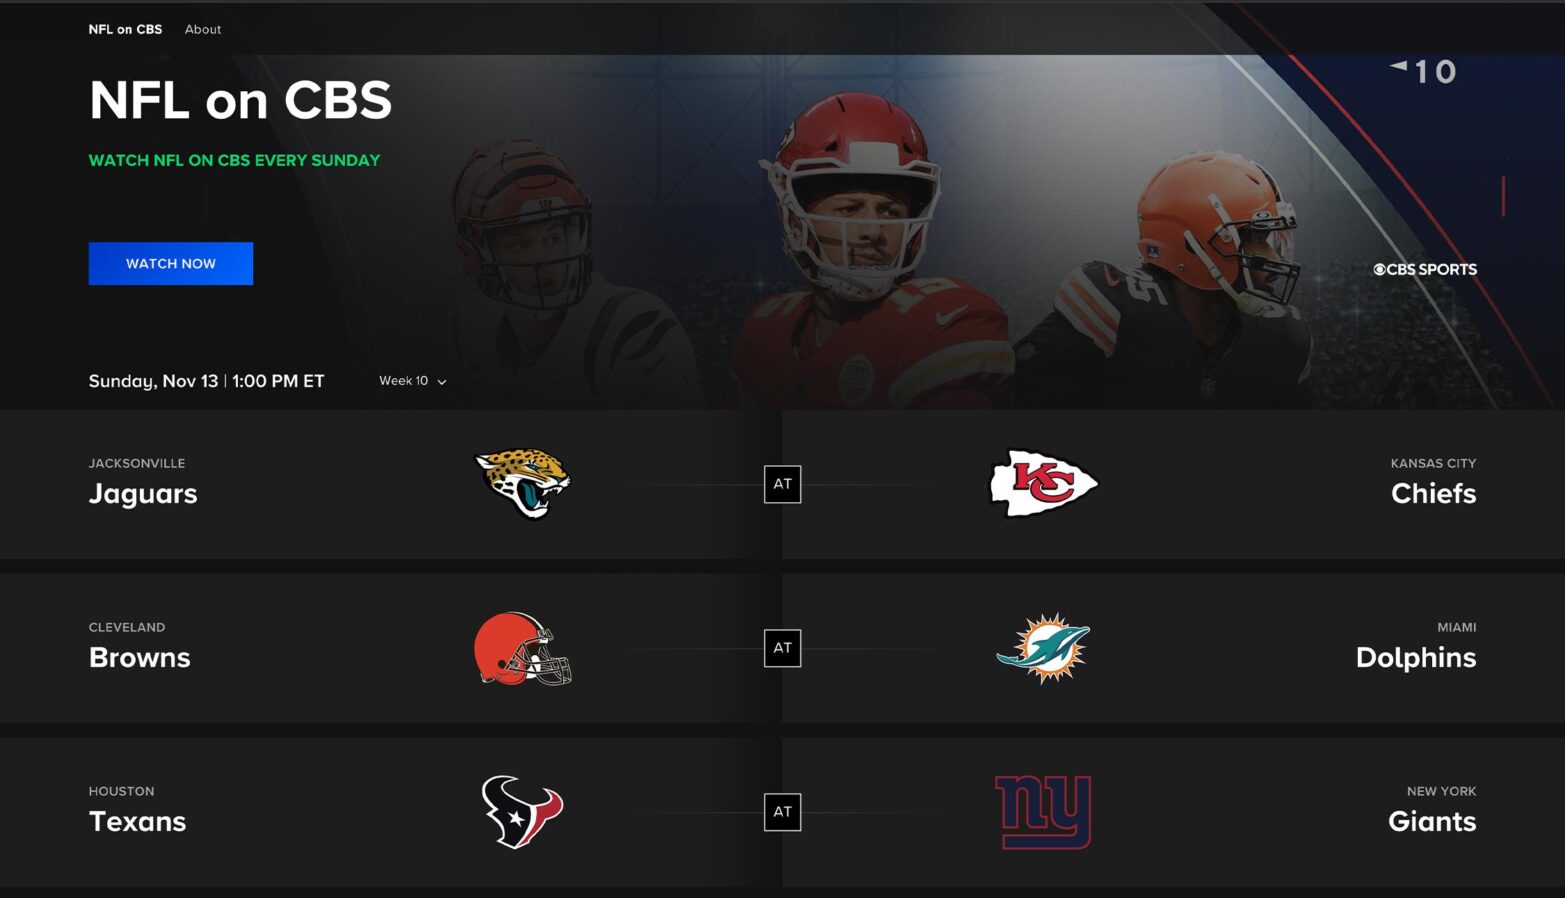 The NFL on CBS show page displays rows of scheduled games on Paramount Plus.